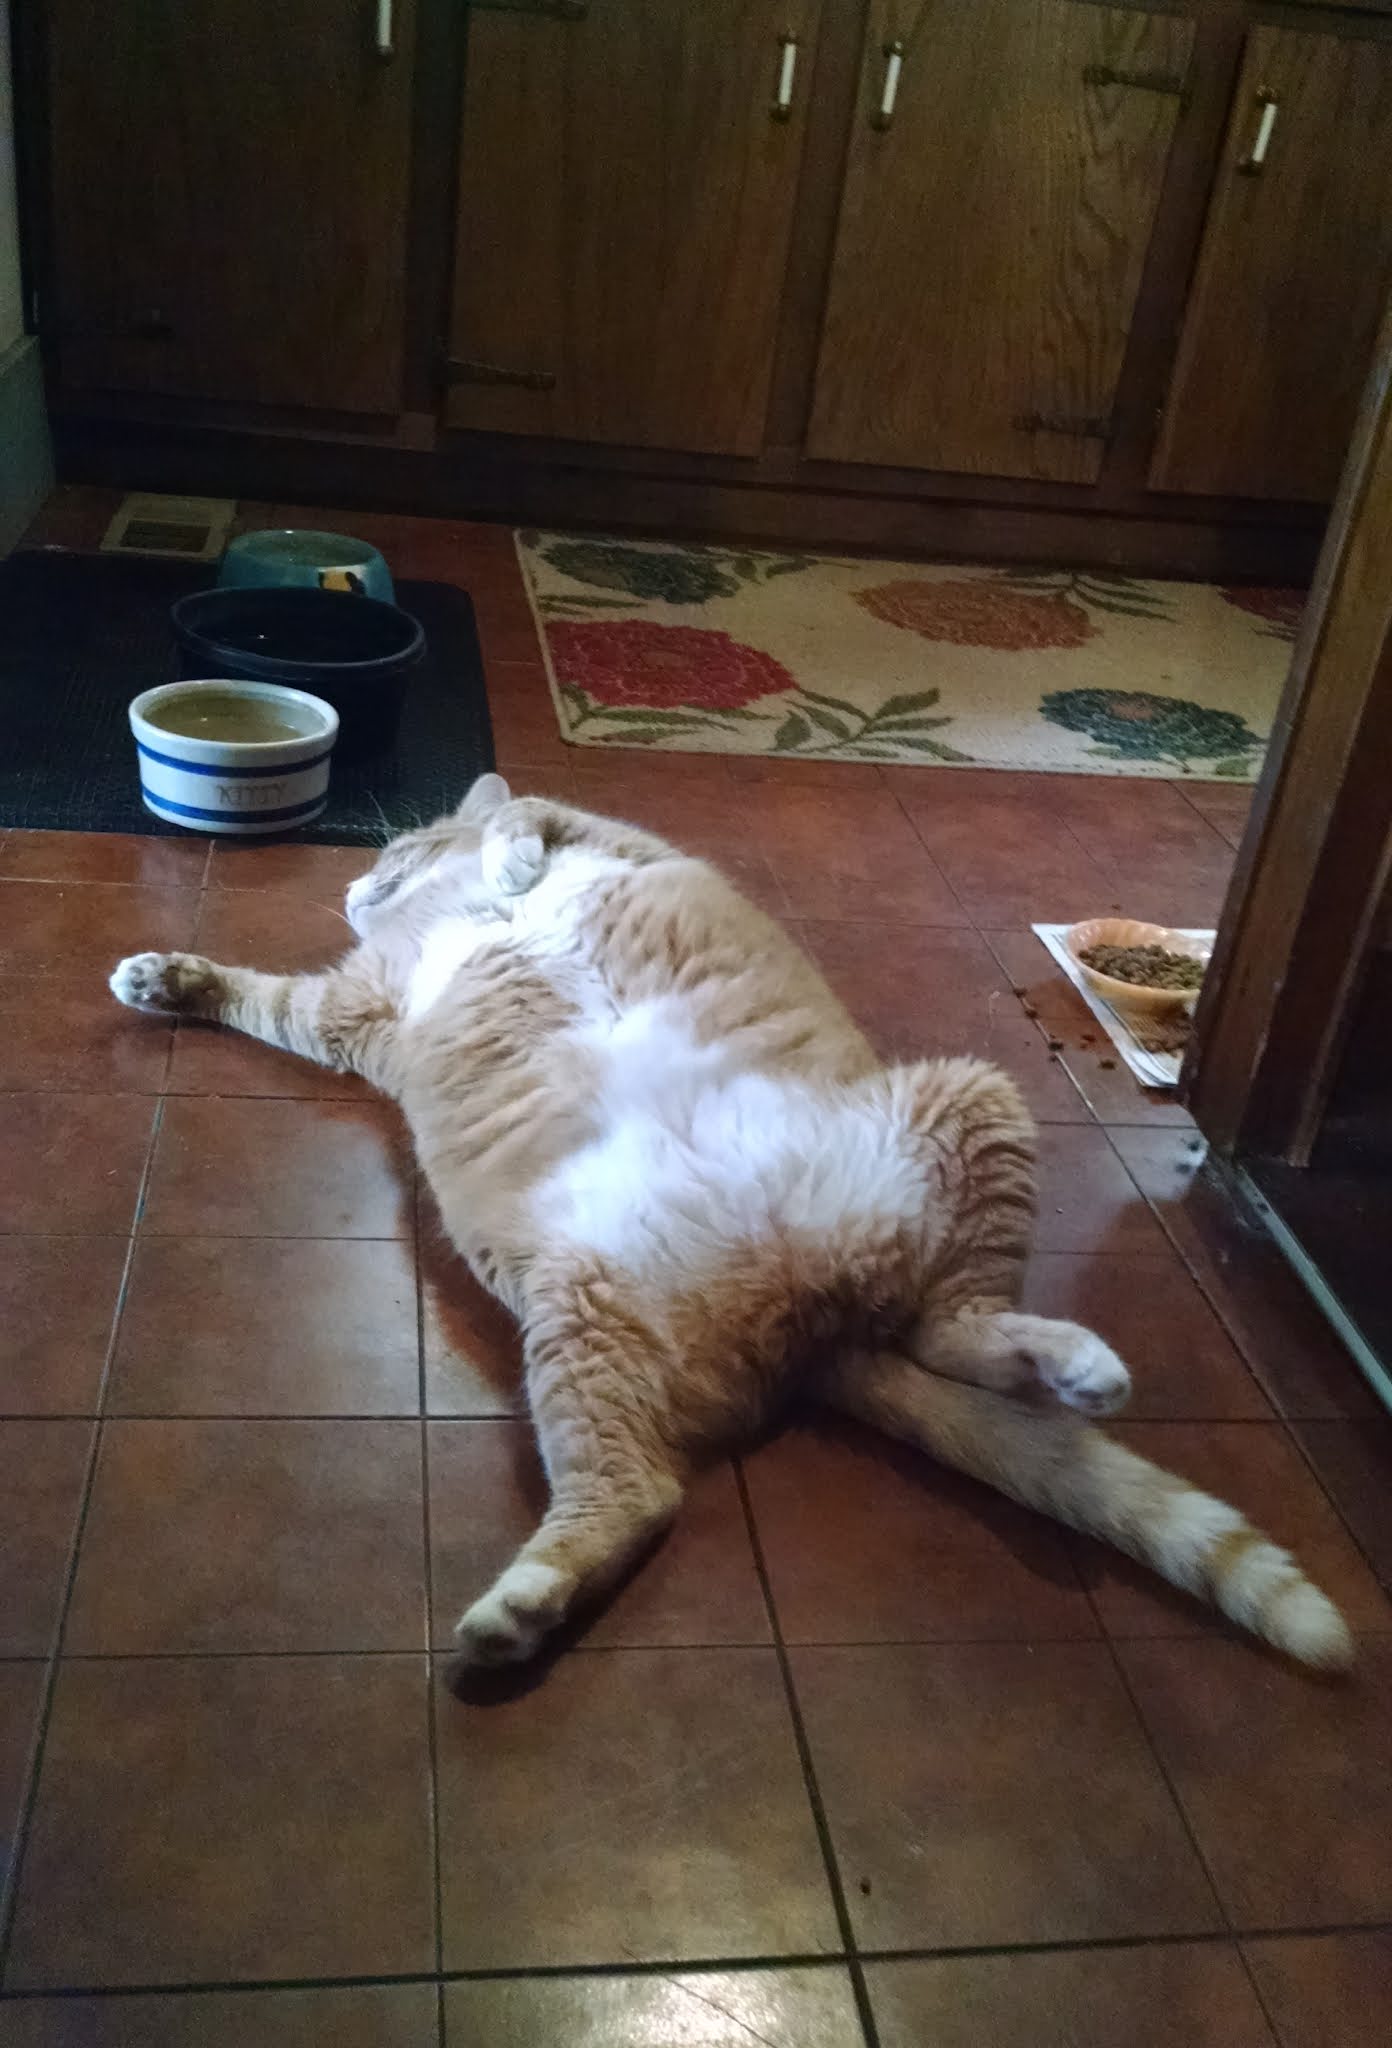 Large cat lying on its back, between water and food bowls.